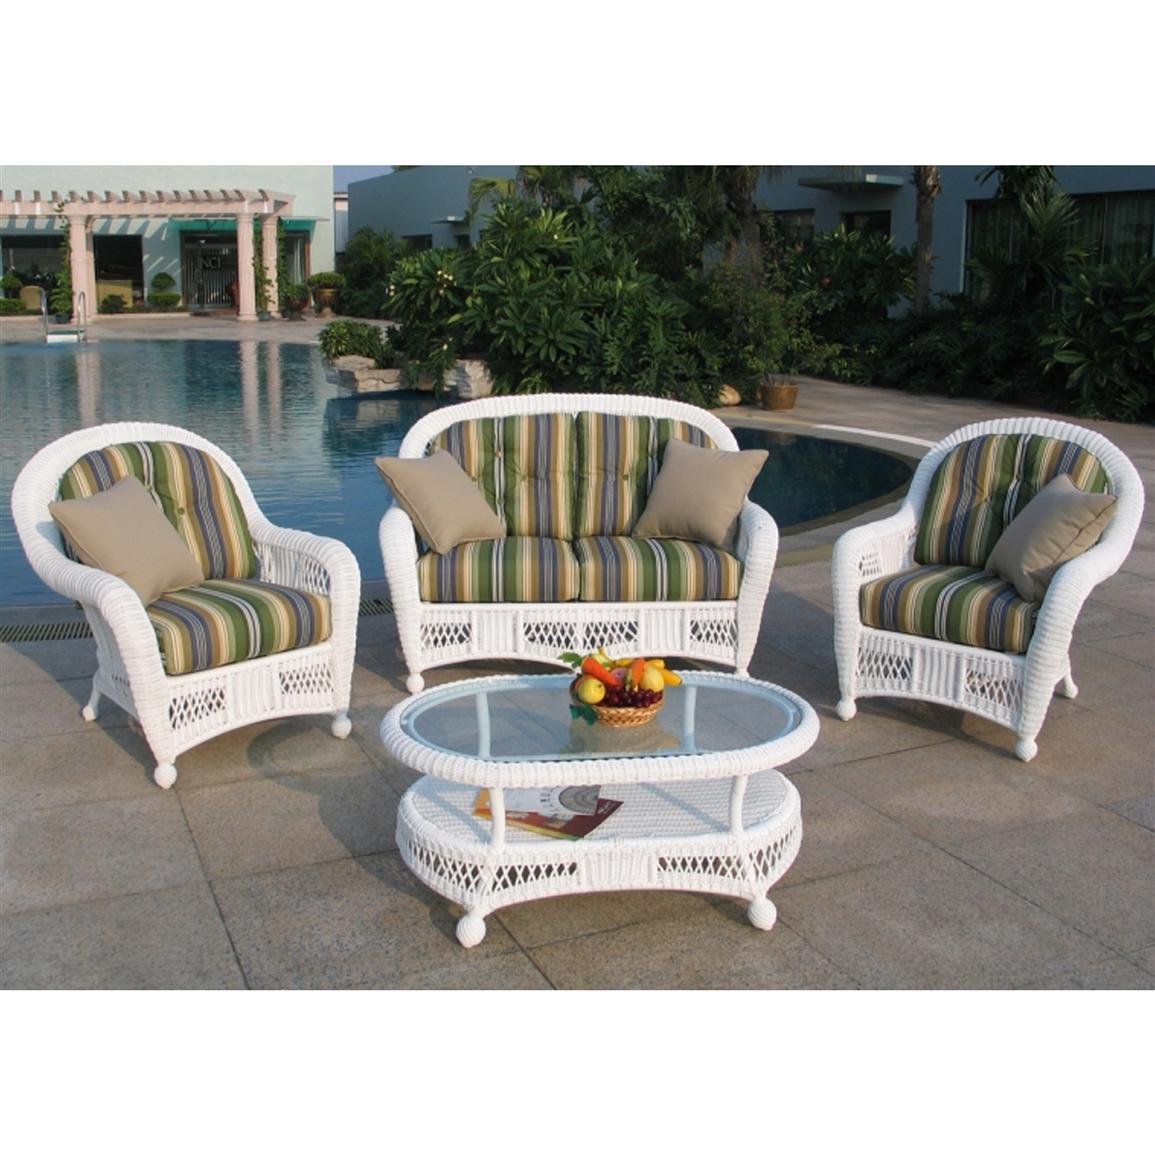 Chicago Wicker Montego 4 Pc Wicker Patio Furniture Collection